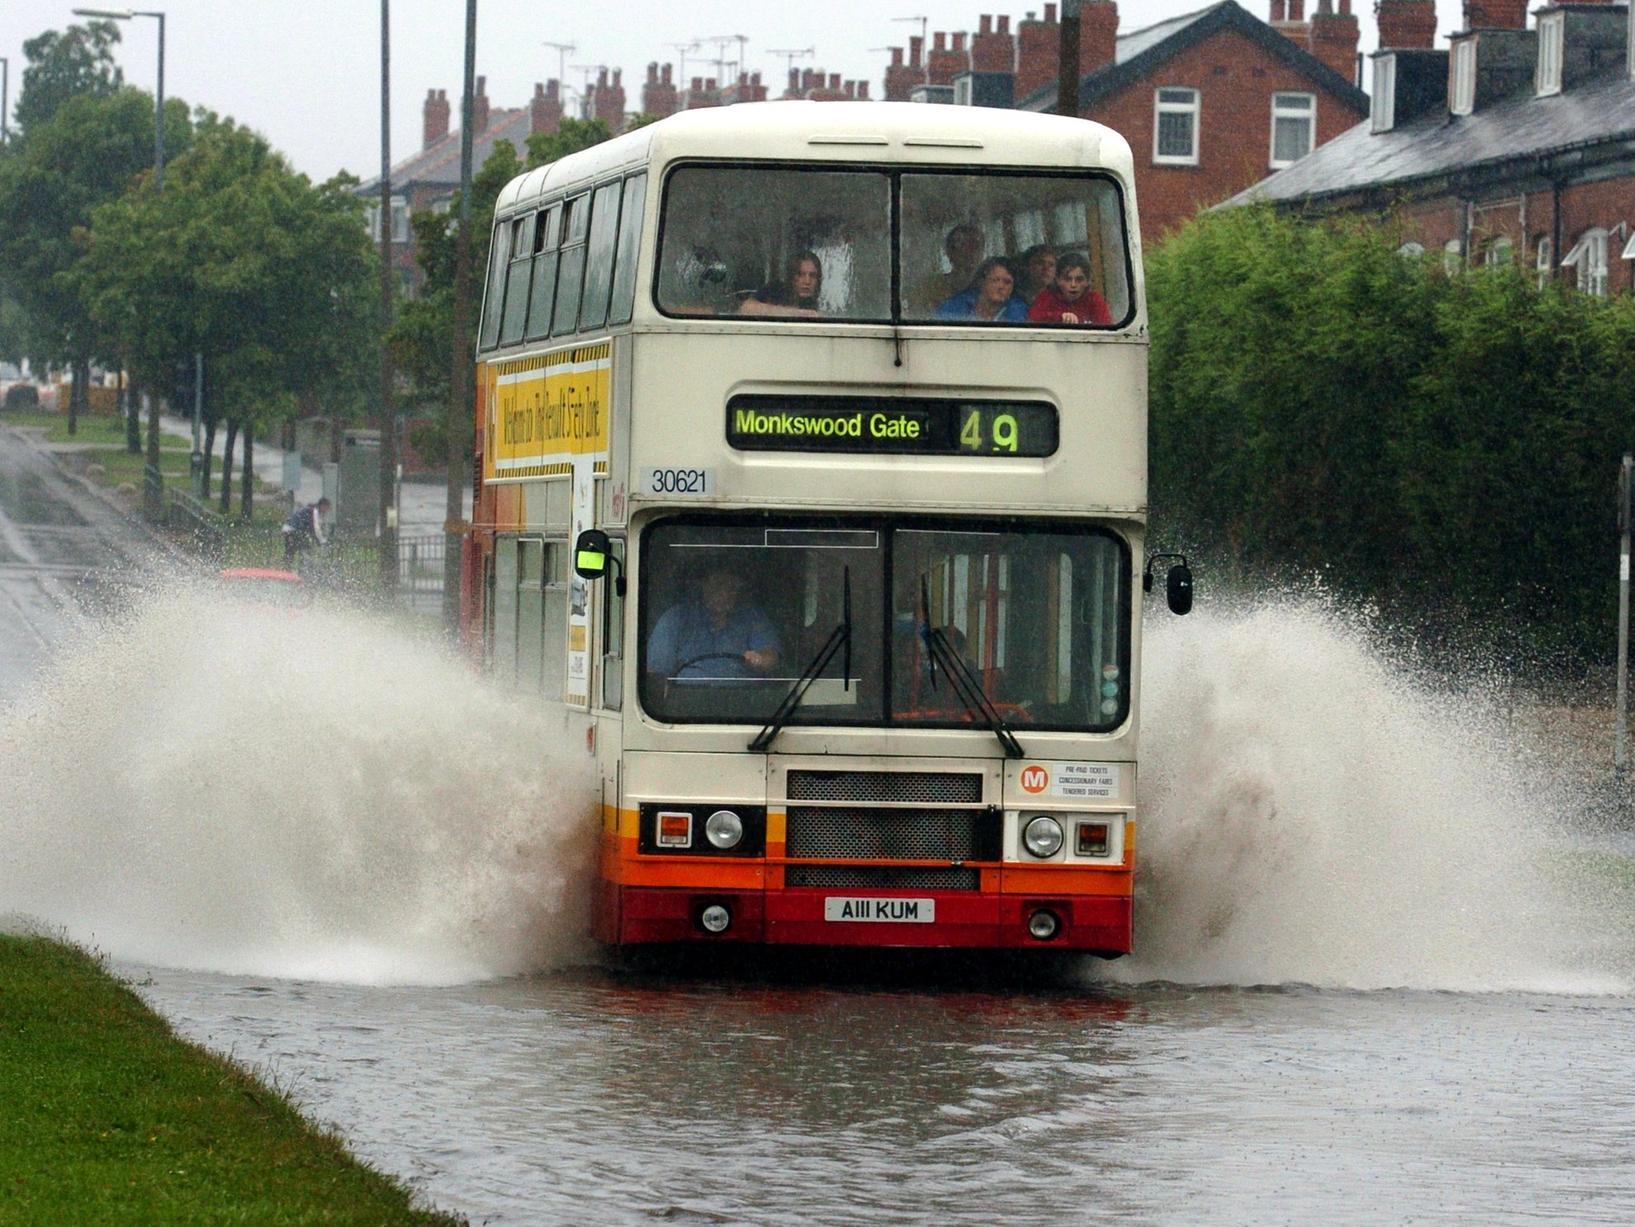 A bus makes its way through flooding on Easterley Road after torential rain hit Leeds.